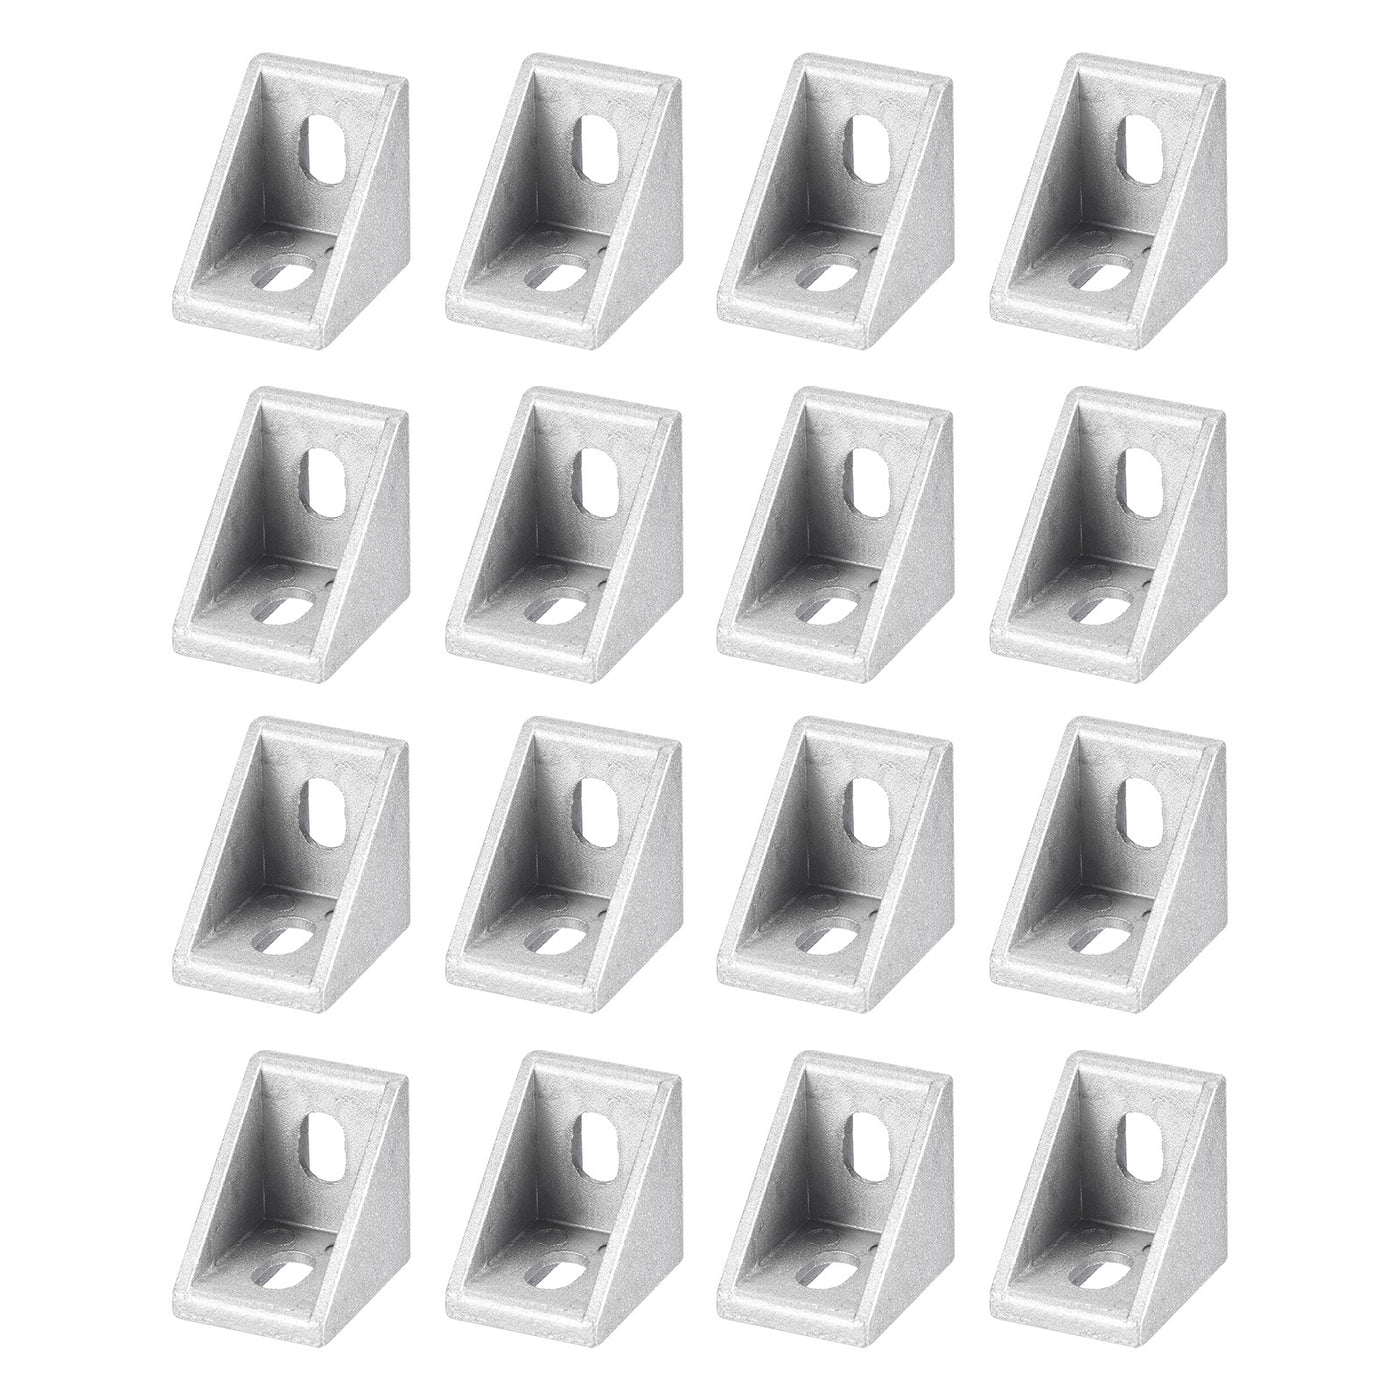 uxcell Uxcell 16Pcs Inside Corner Bracket Gusset, 30x30x24mm 2430 Angle Connectors for 2040/4040/8080 Series Aluminum Extrusion Profile Silver